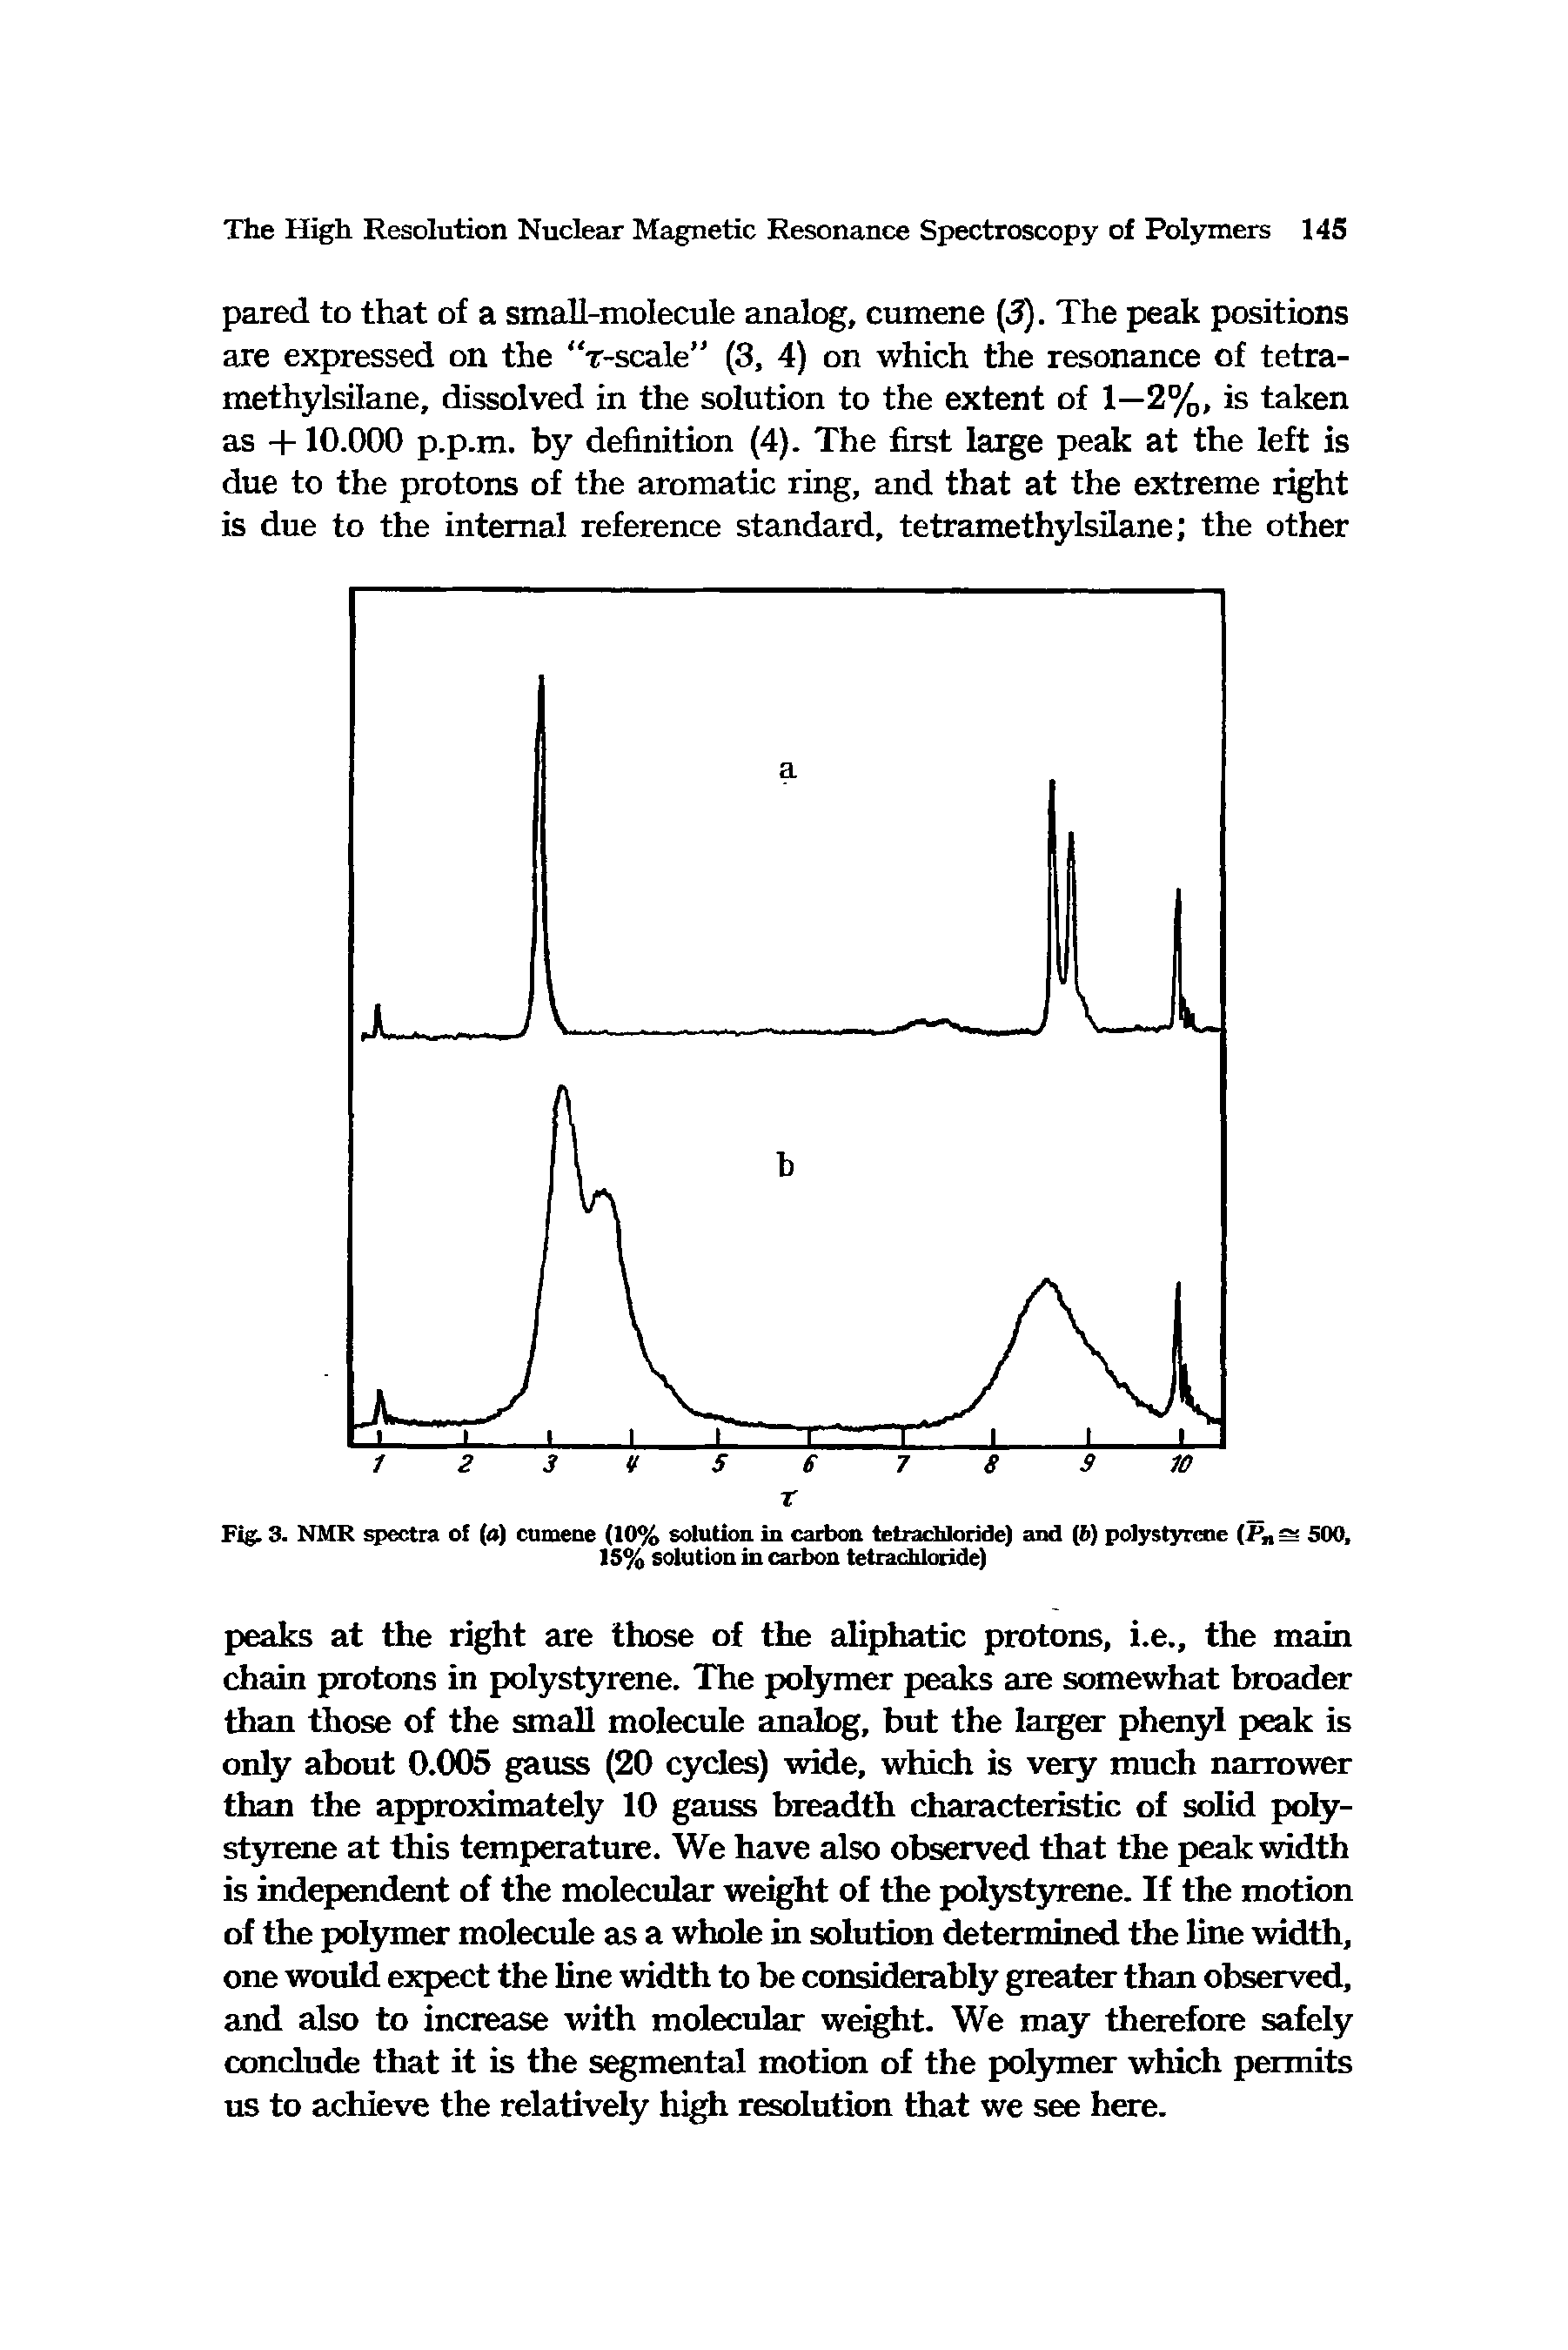 Fig. 3. NMR spectra of (a) cumene (10% solution in carbon tetrac loride) and (6) polystyrene Pn 500, 15% solution in carbon tetrachloride)...